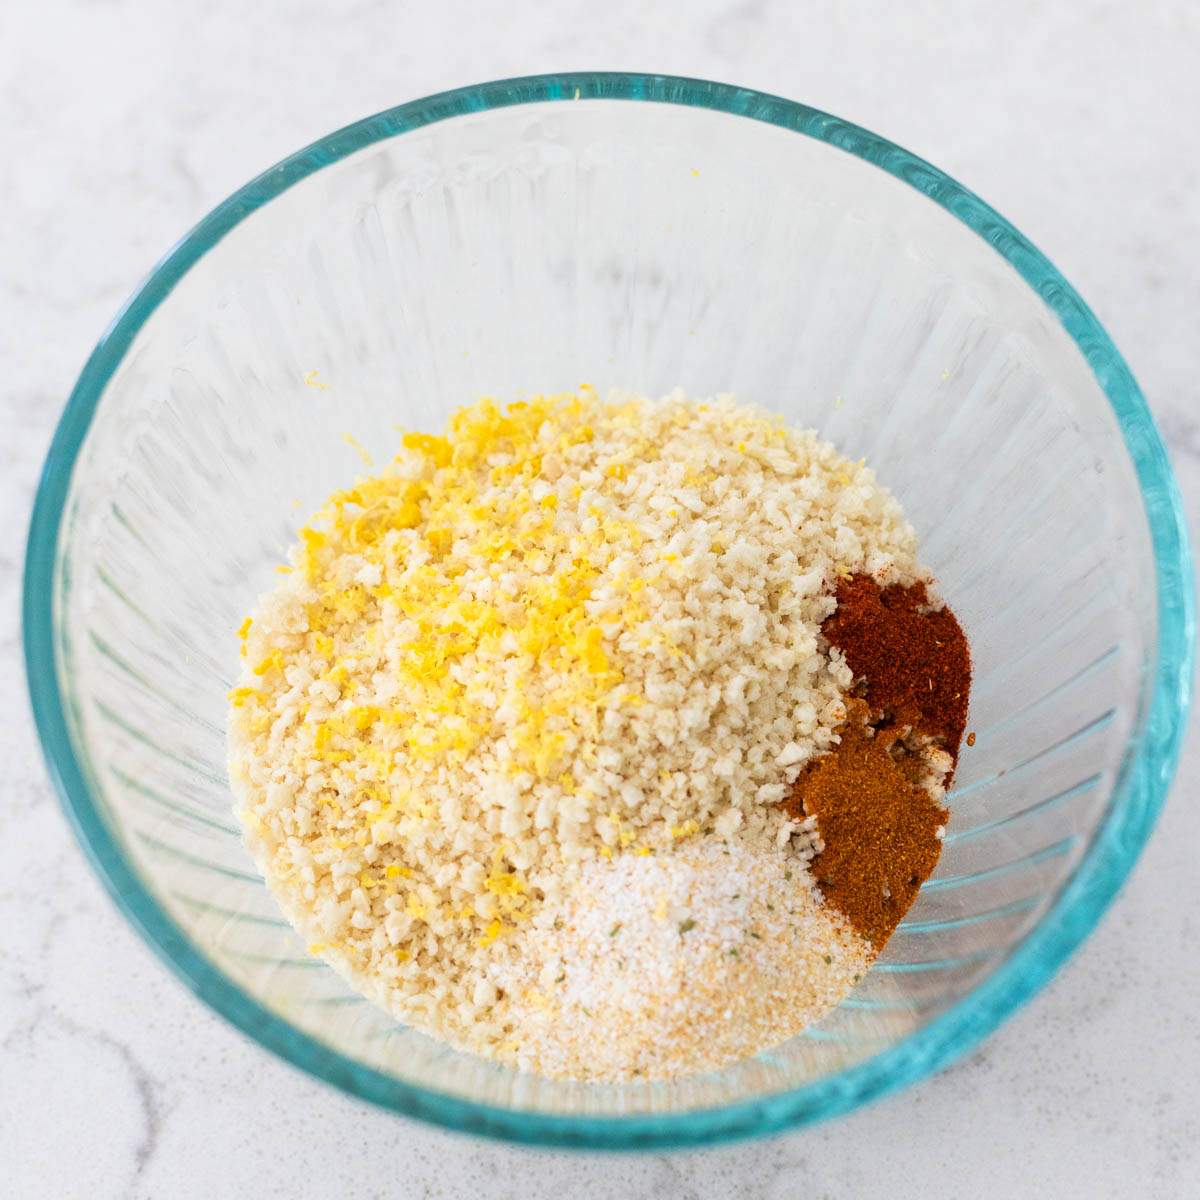 The breadcrumbs have lemon zest and spices on top.